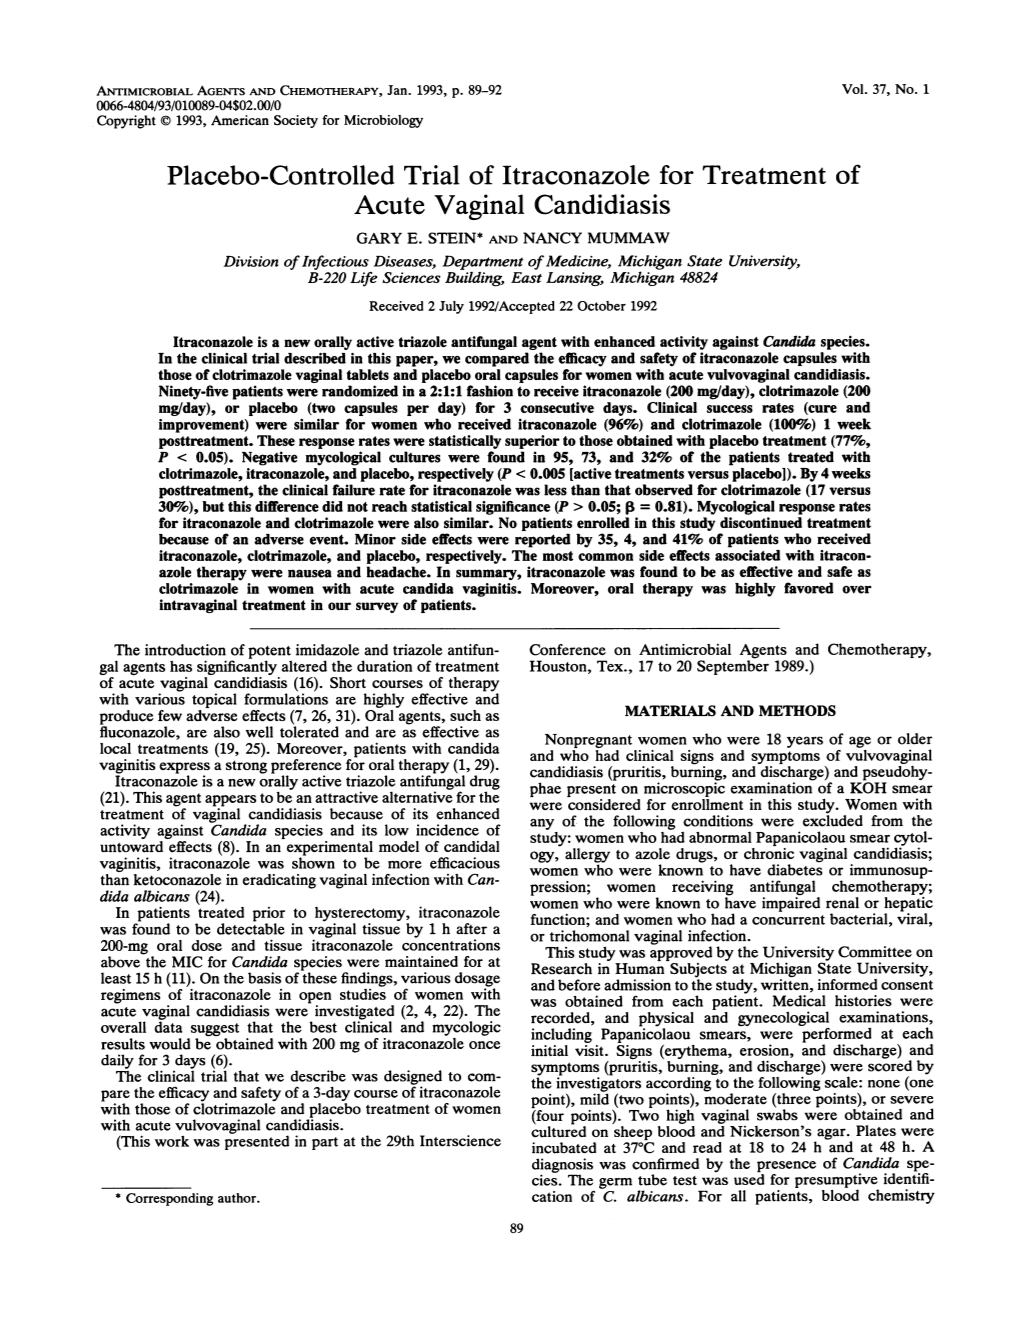 Placebo-Controlled Trial of Itraconazole Fortreatment of Acute